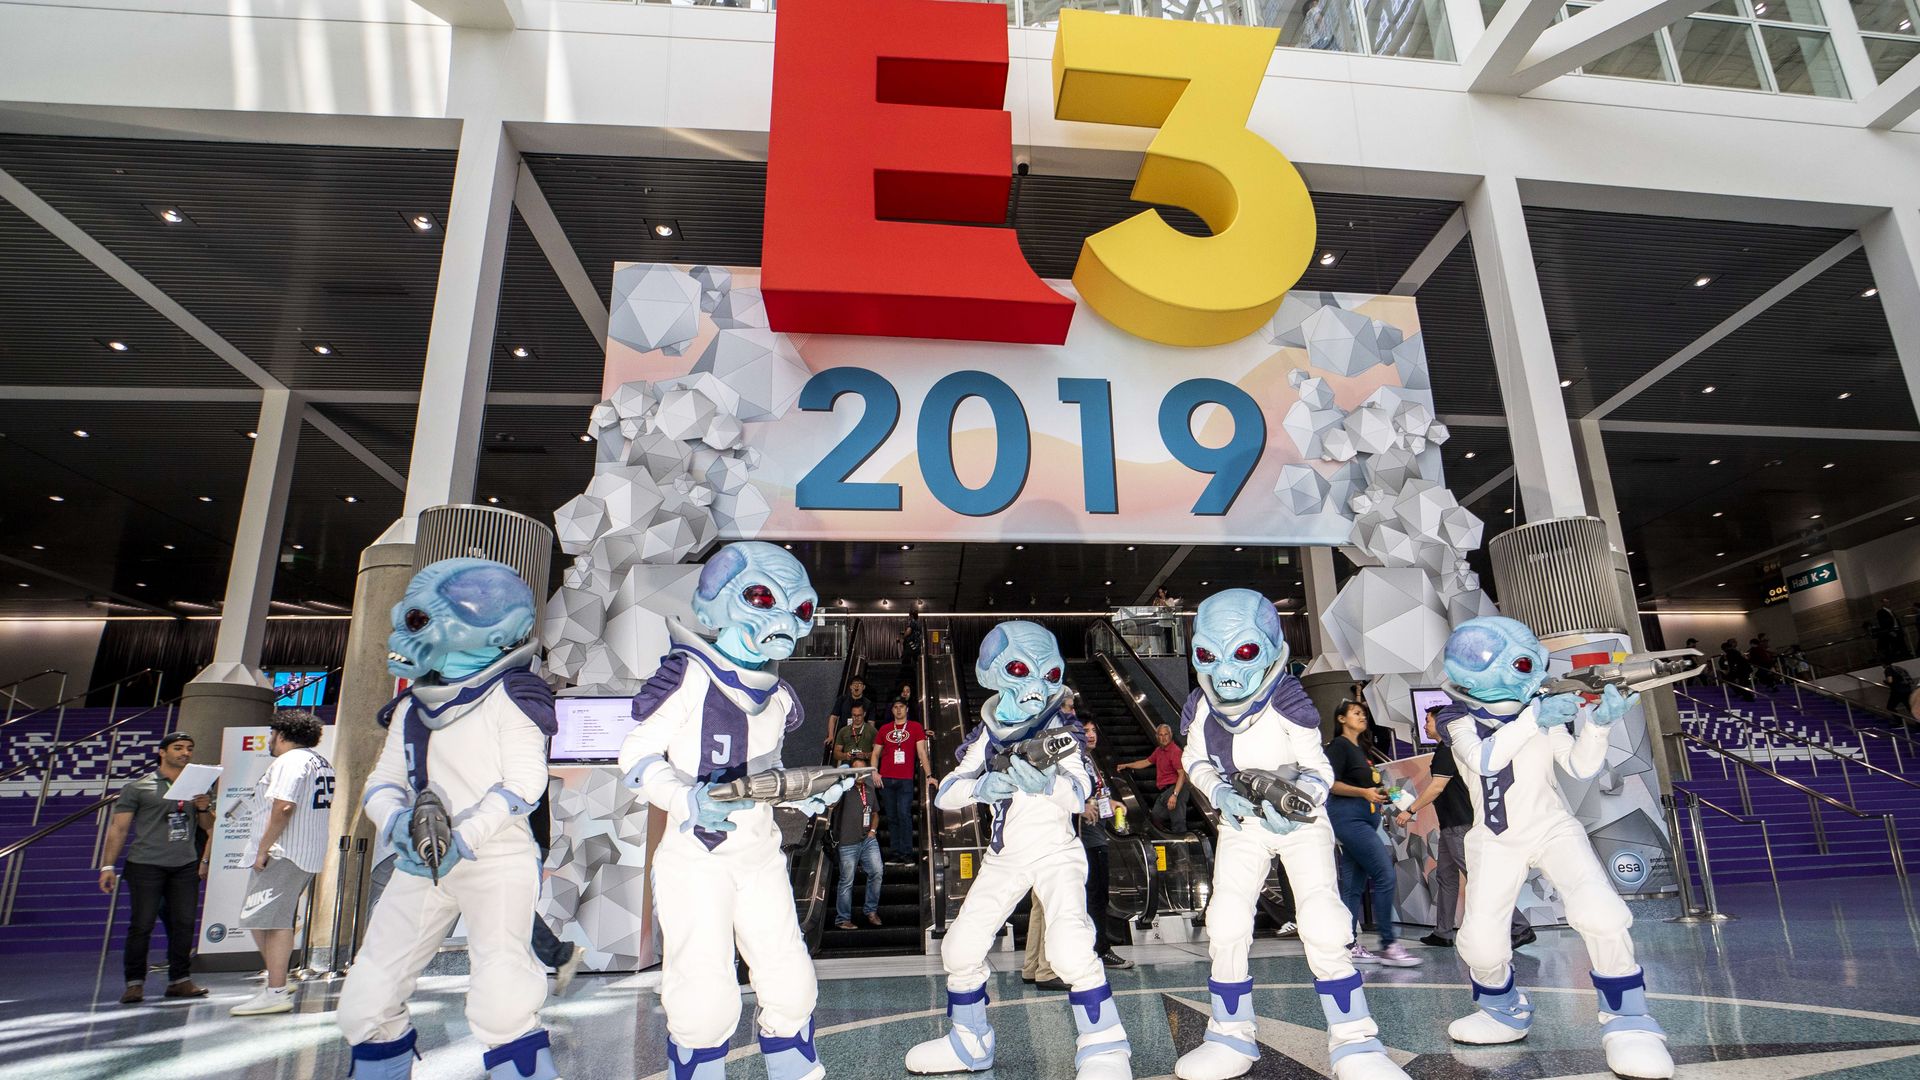 Photo of people dressed as alien costumes while promoting a new video game at the 2019 E3 video game trade show in Los Angeles.